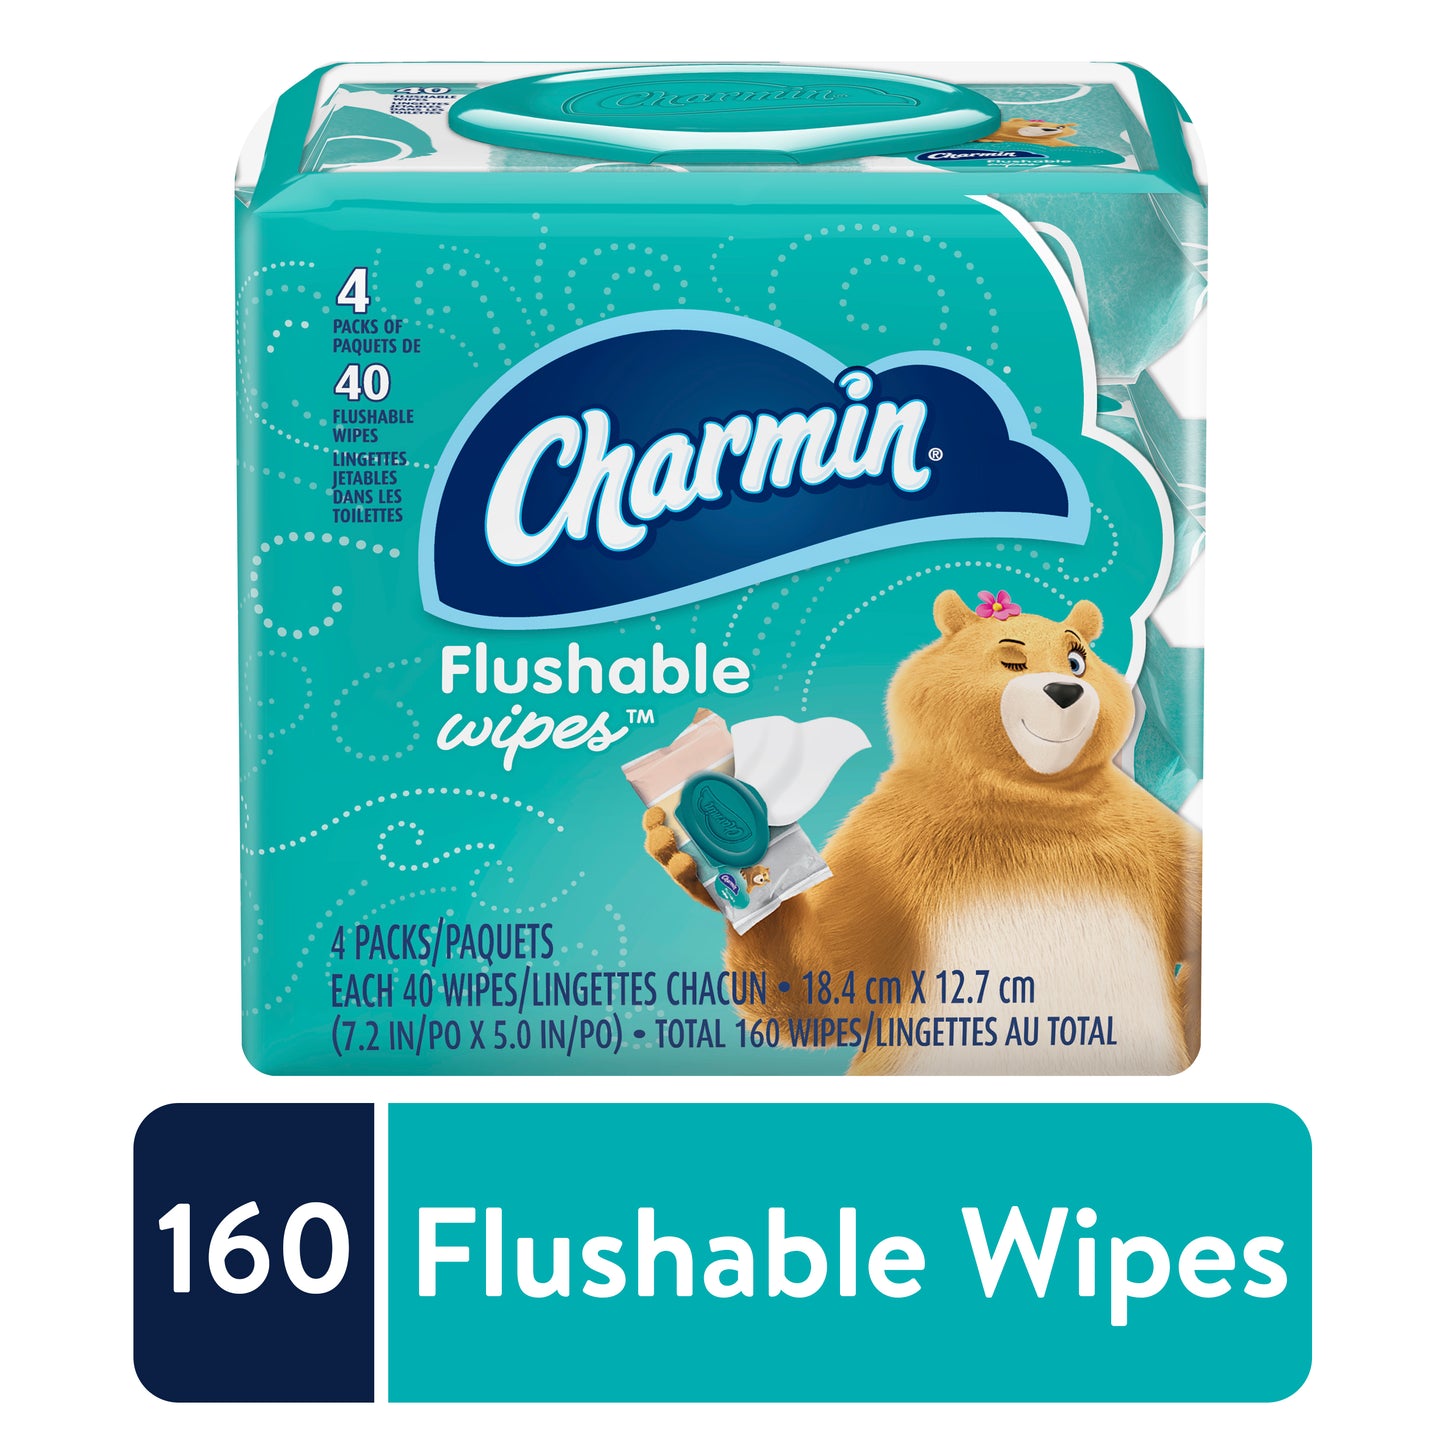 Charmin Flushable Wipes 4-PACK, 160 Total